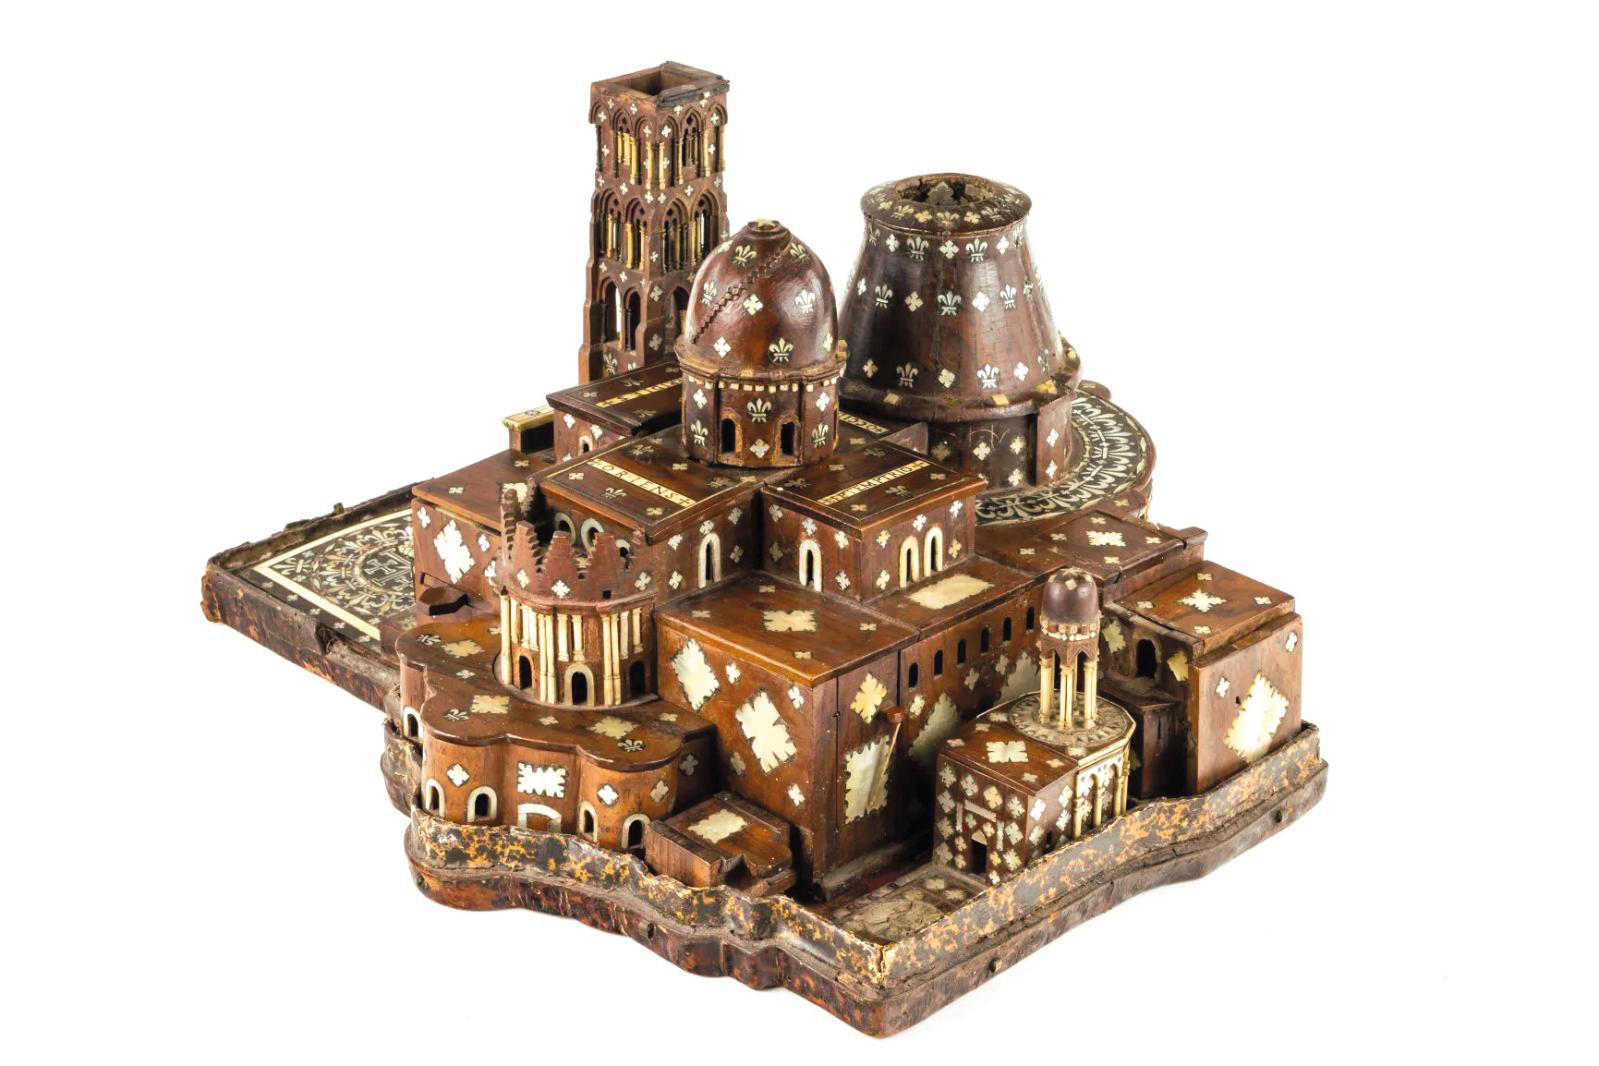 Model of the Holy Sepulcher: A Rare Treasure from the 17th Century